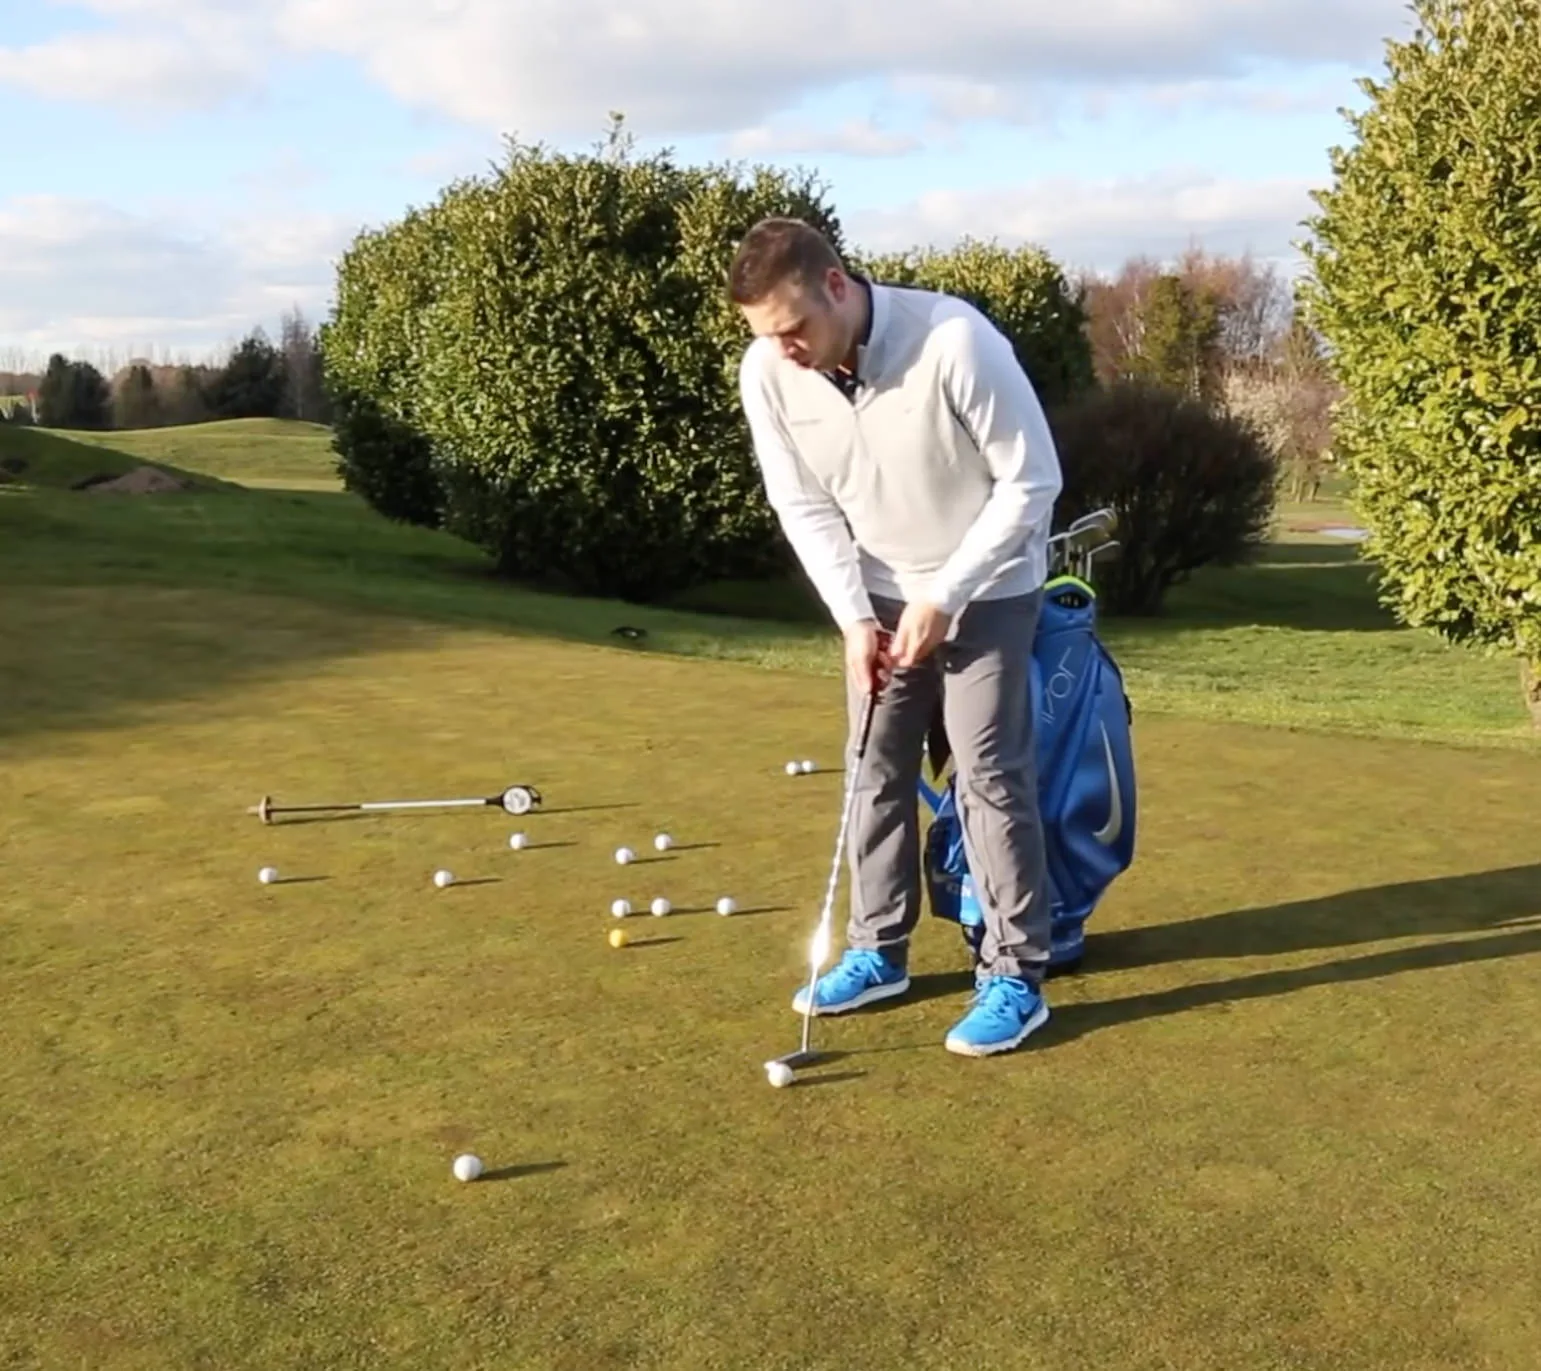 Golf Tips: How to keep good posture when putting